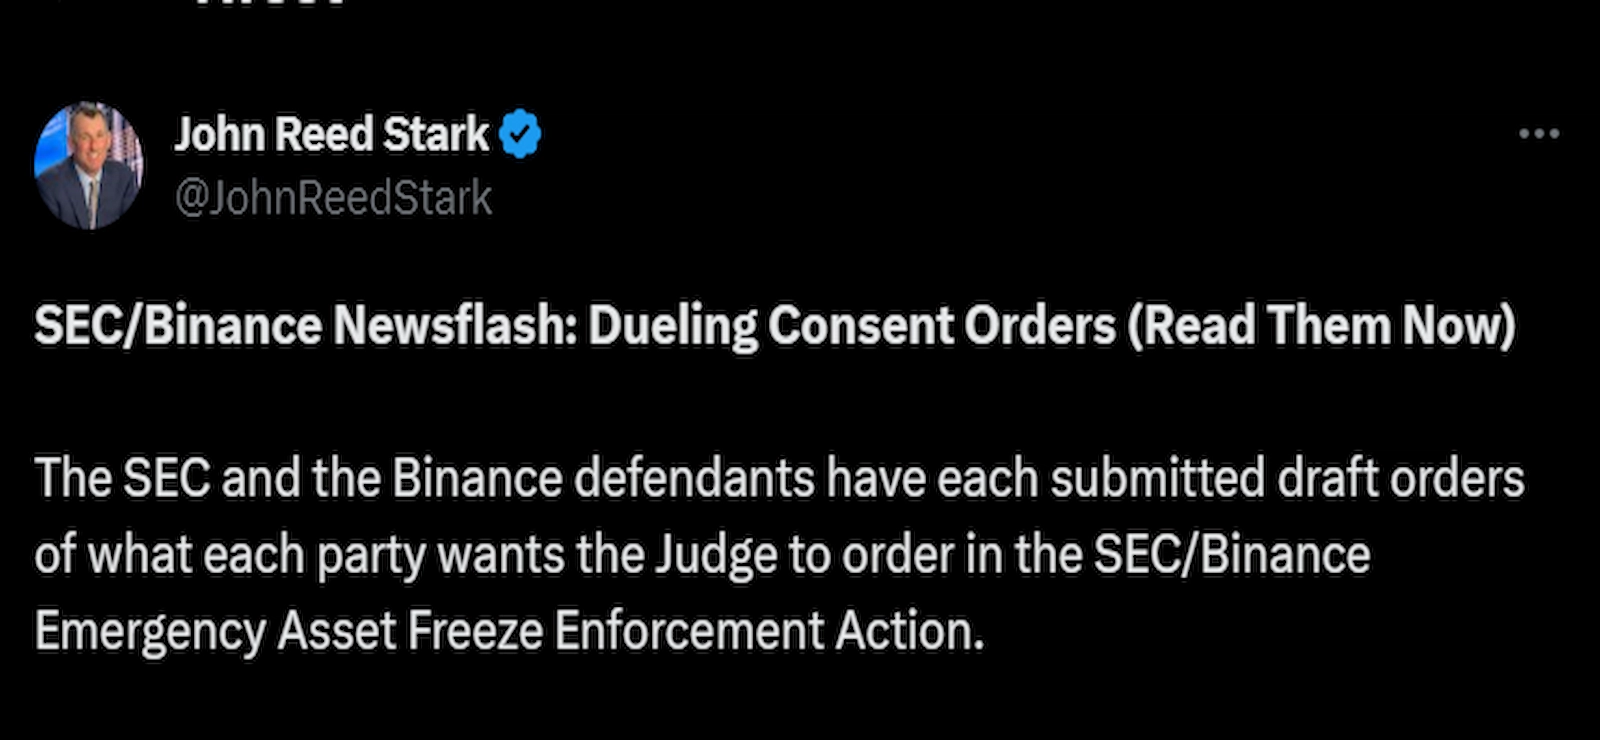 SEC and Binance.US submitted conflicting consent orders